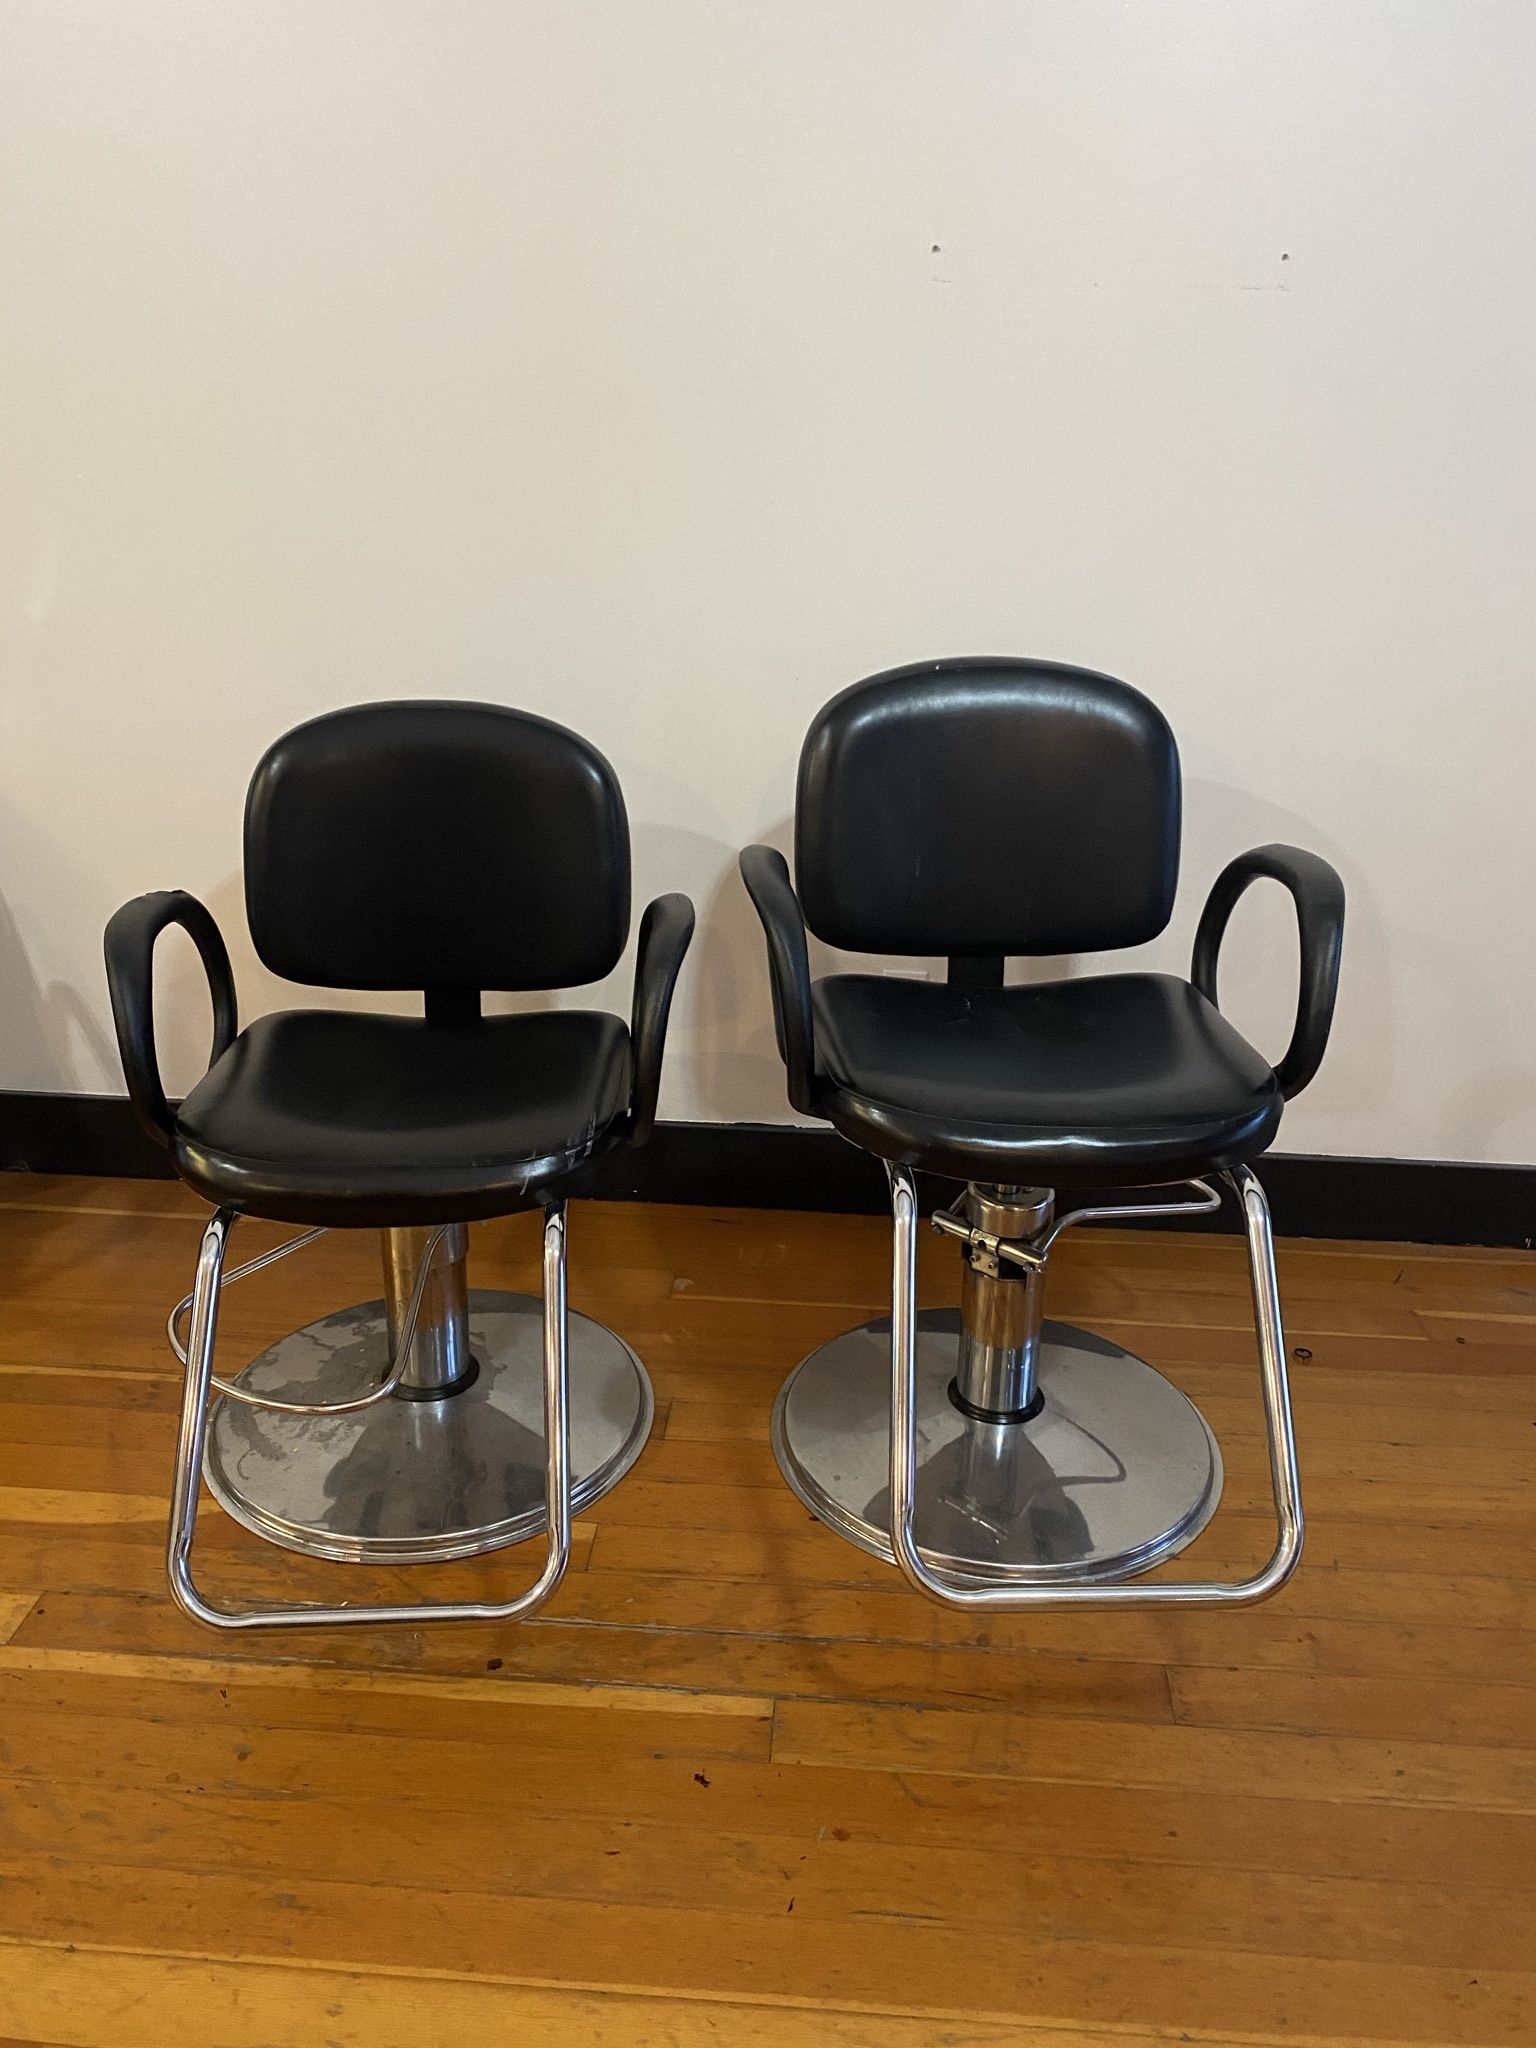 $50 FOR TWO SALON CHAIRS